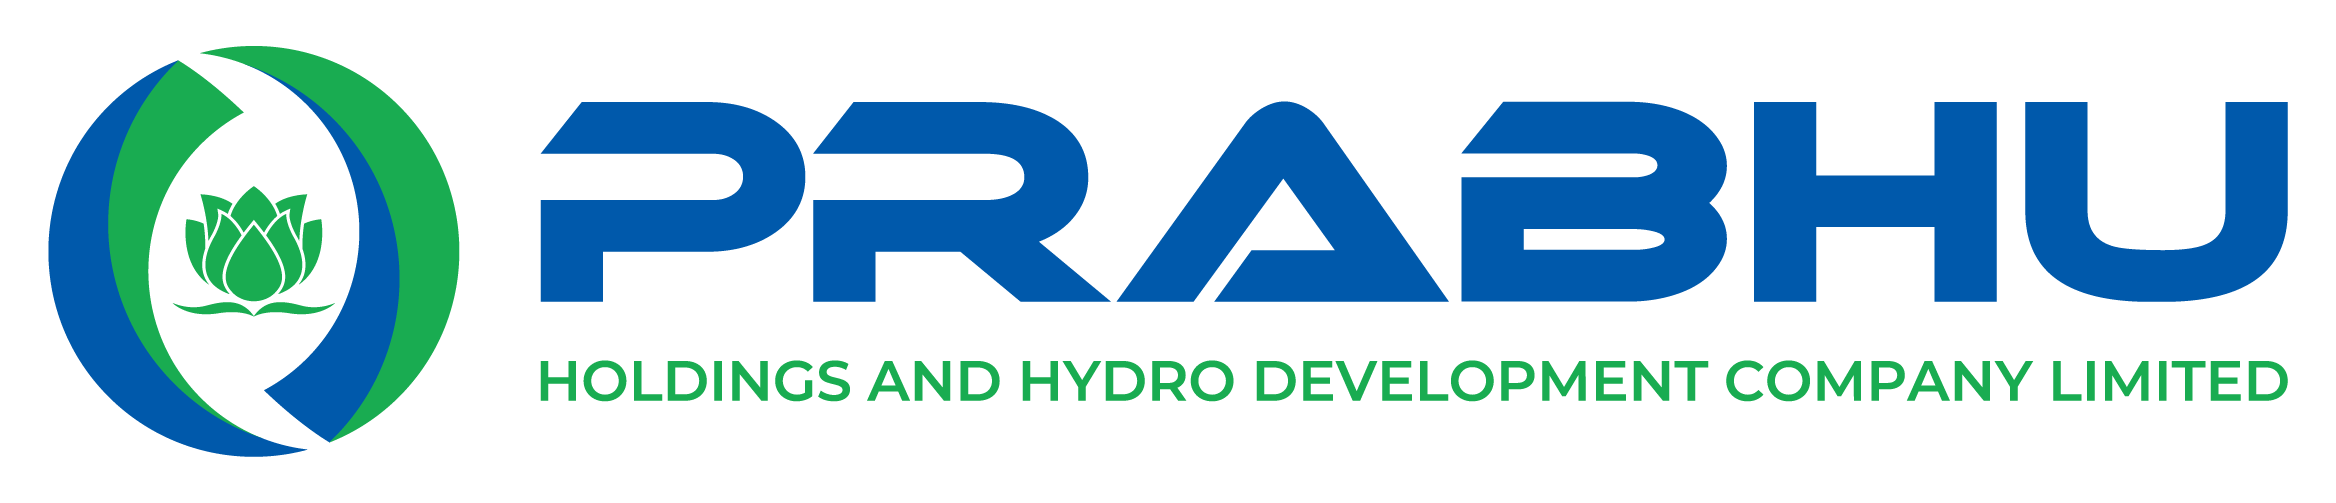 HOLDINGS AND HYDRO DEVELOPMENT COMPANY LIMITED-01